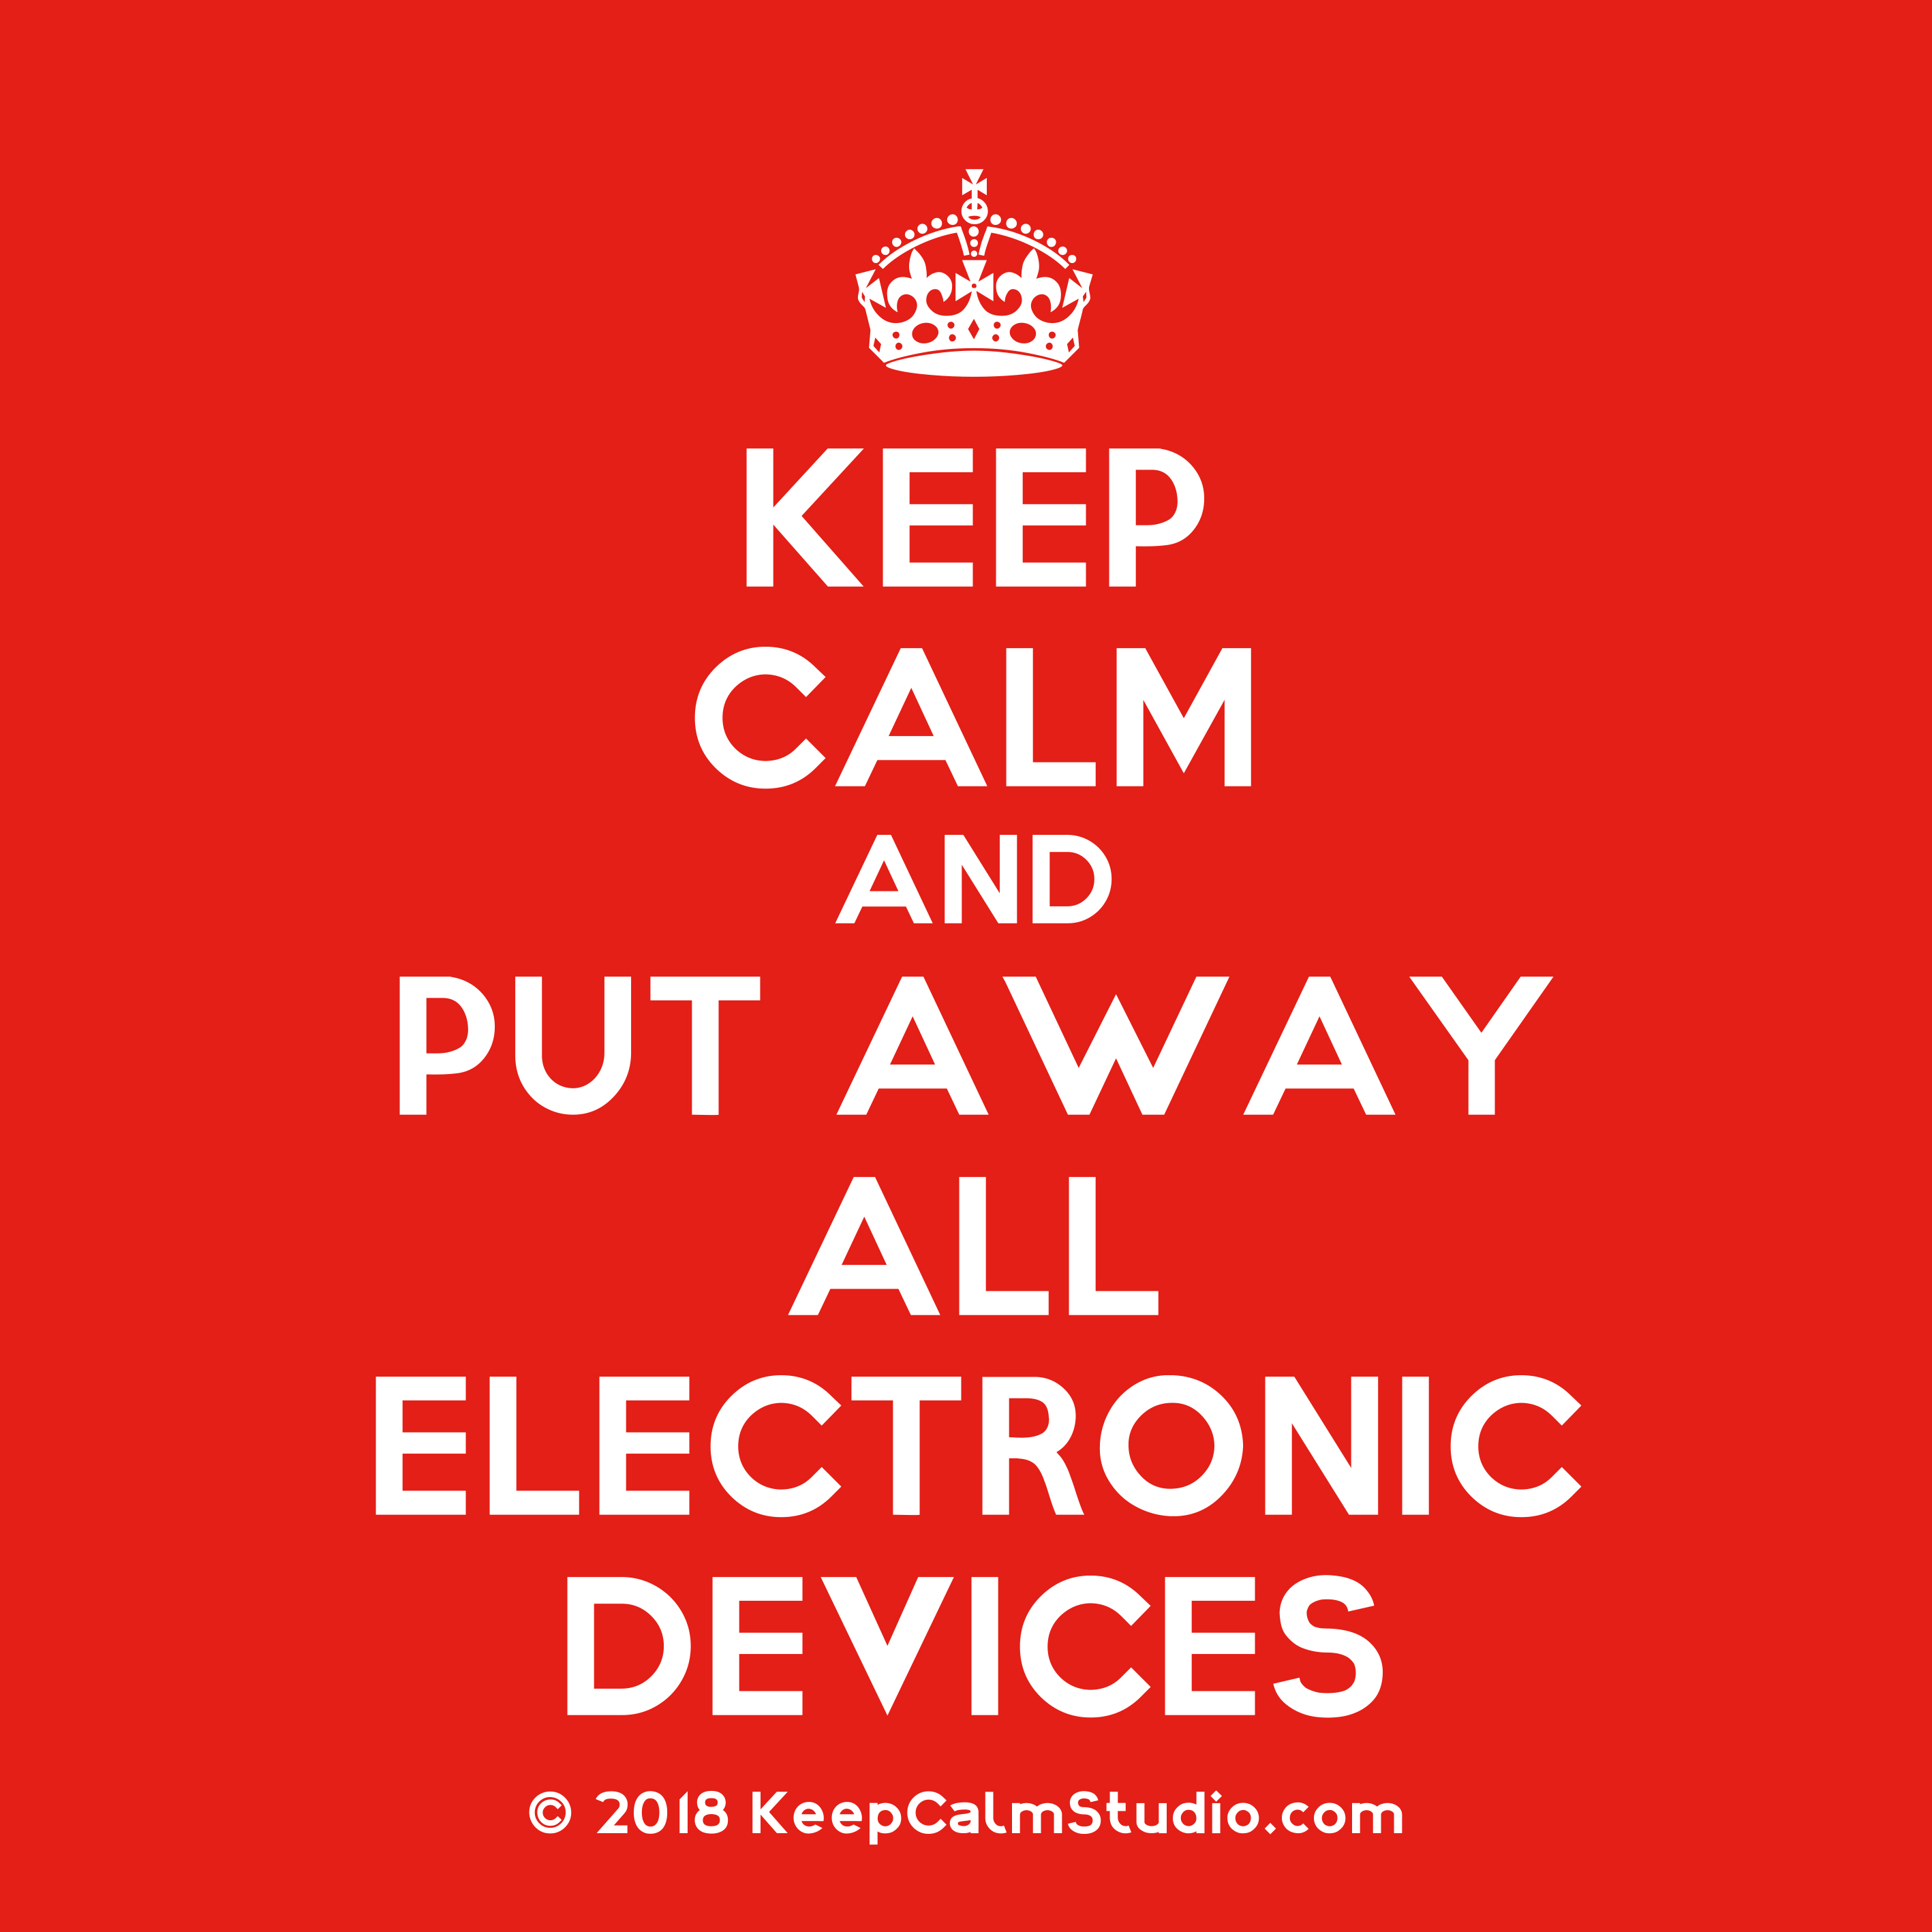 keep calm and put away all devices sign